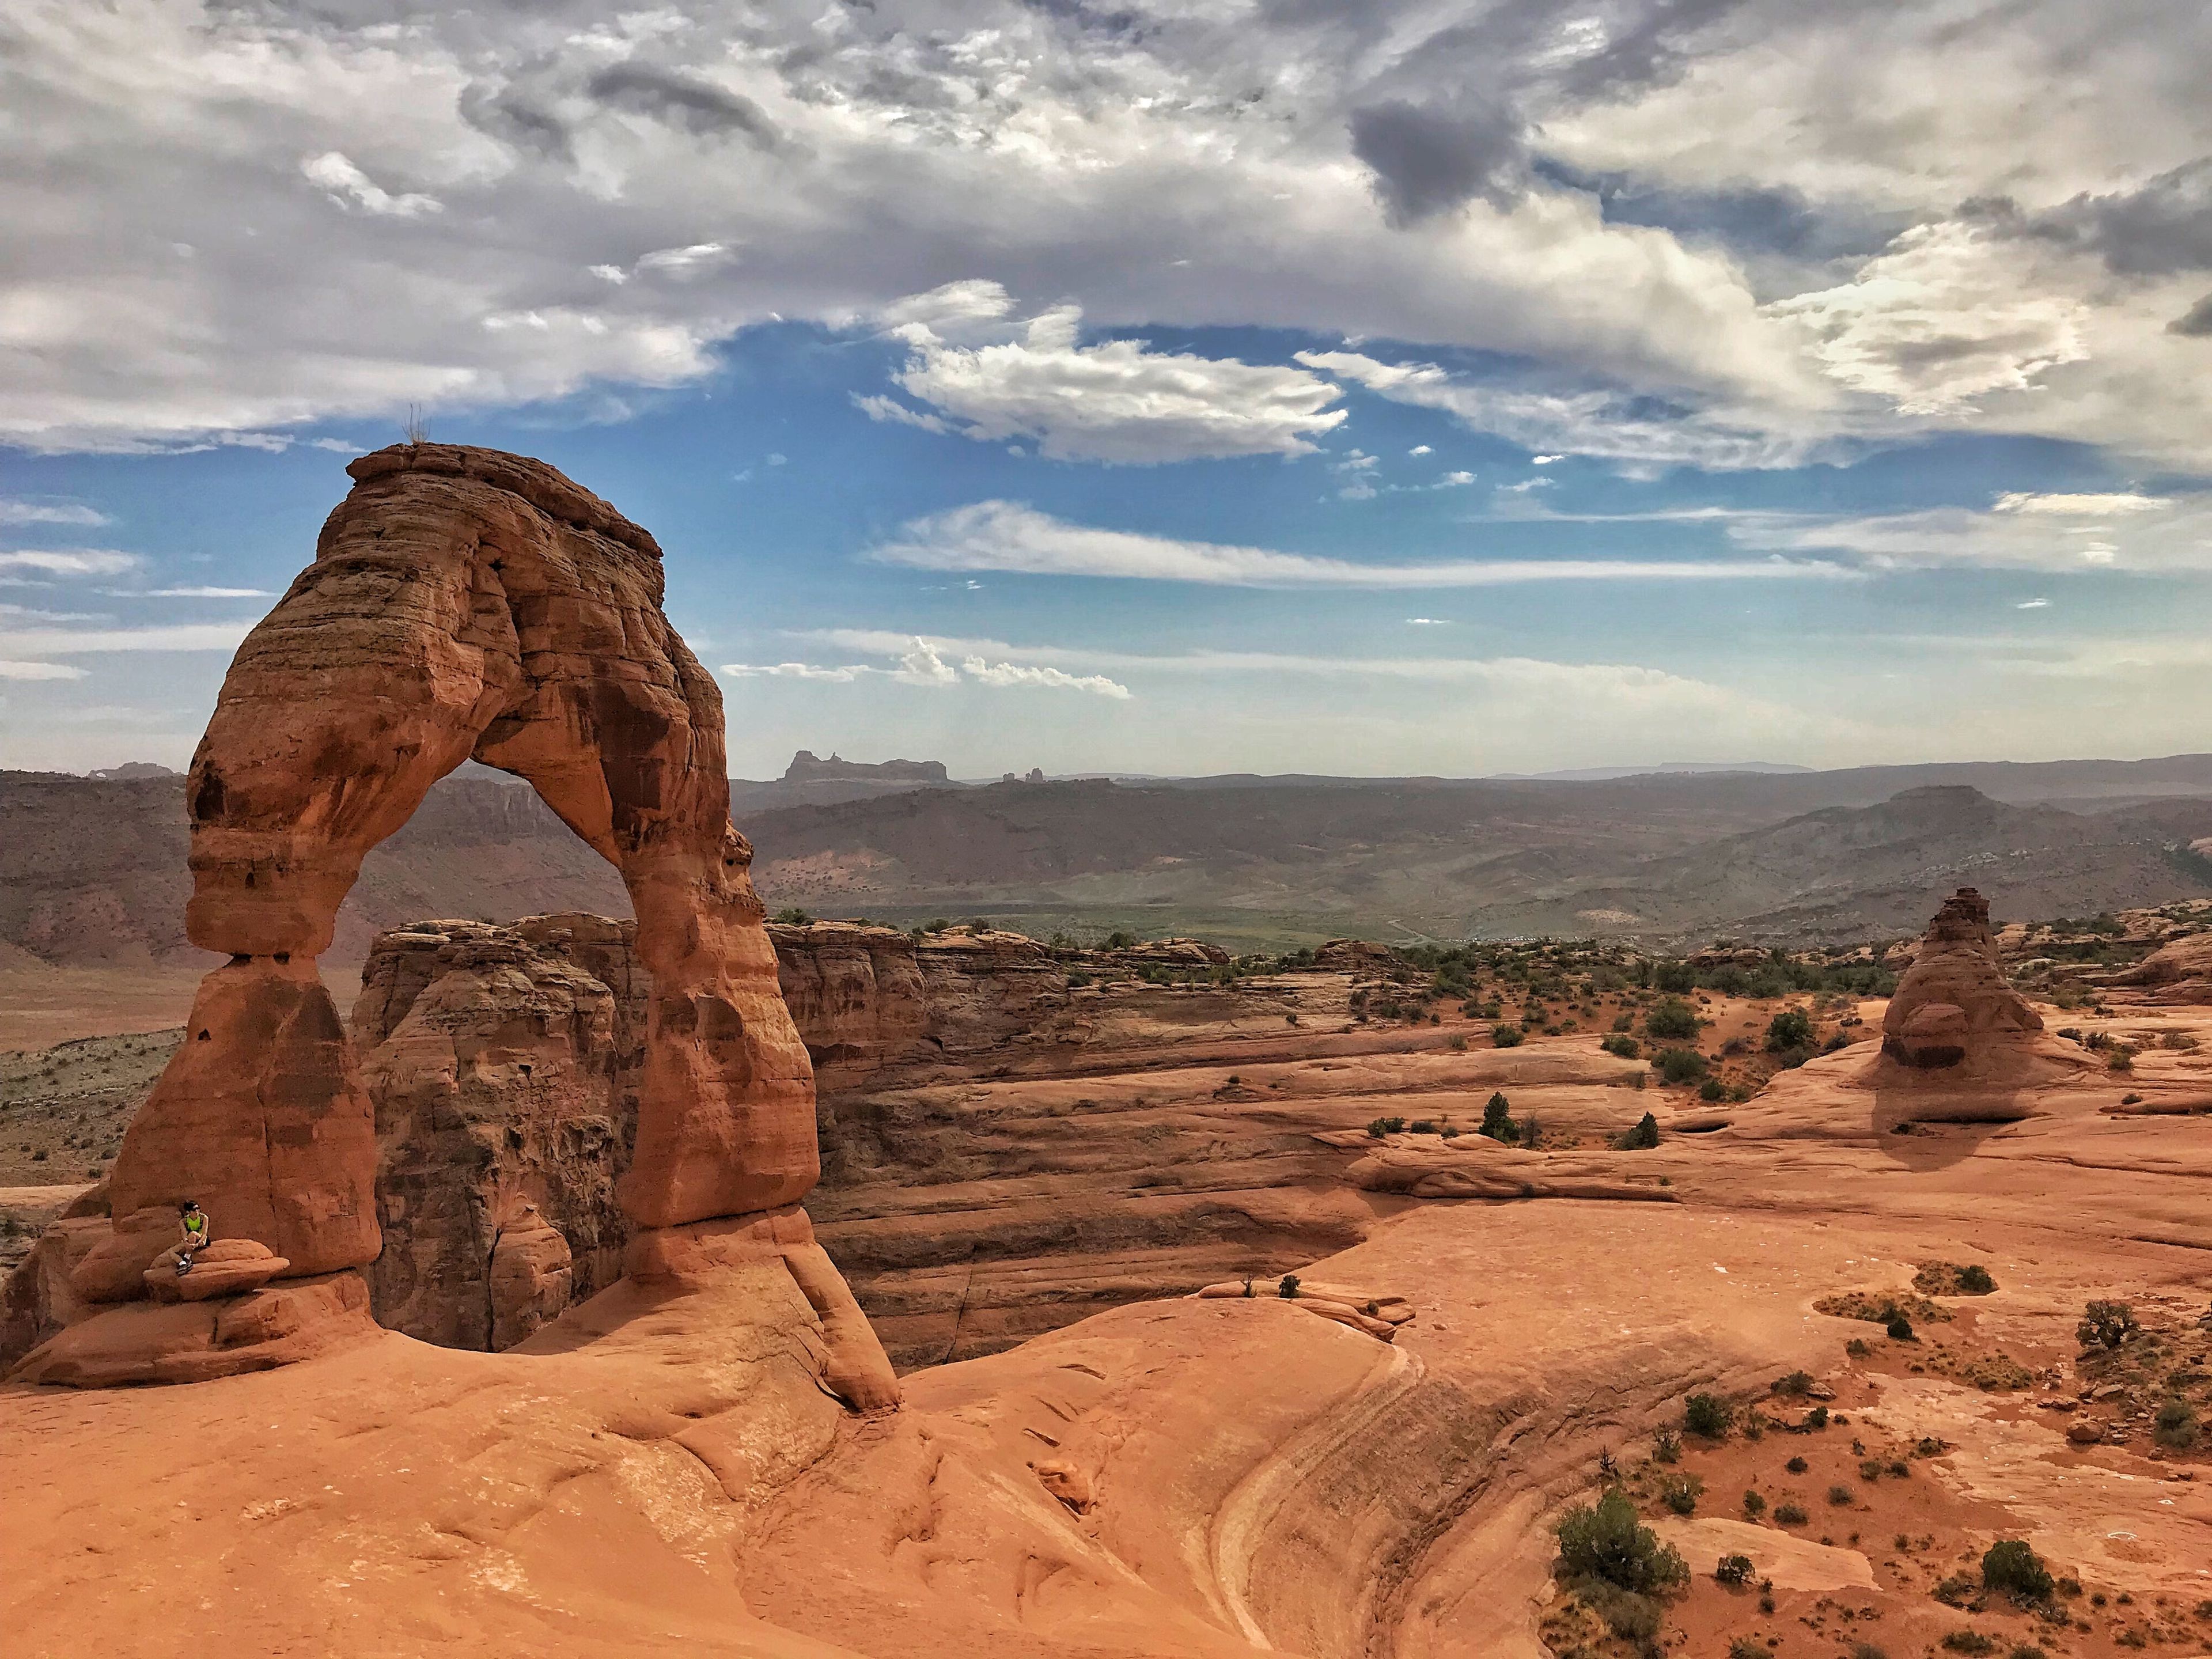 The Delicate Arch at Arches National Park in Moab, Utah.